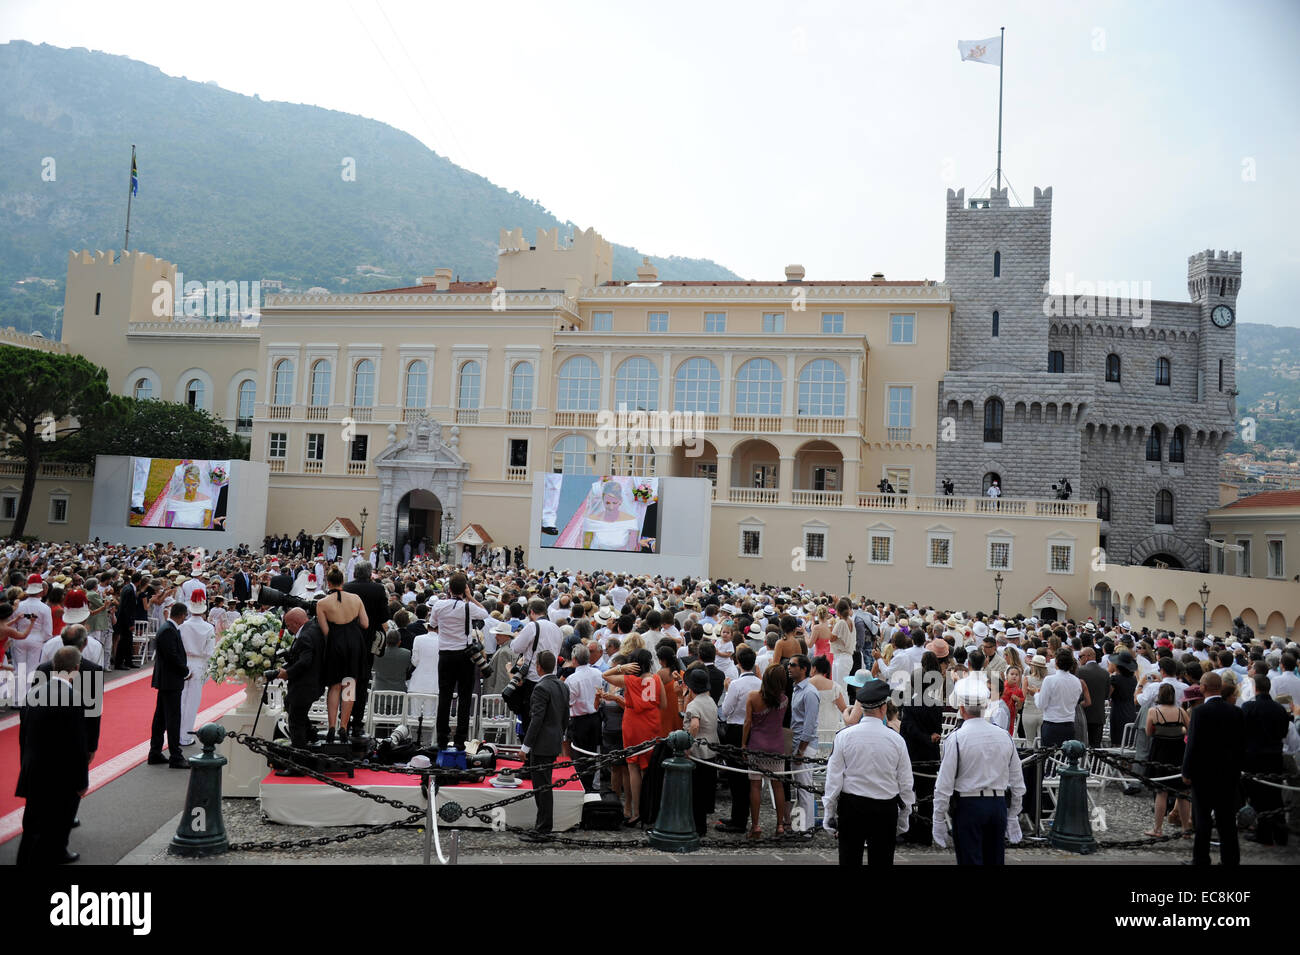 Atmosphere prior to the beginning of the religious wedding of Prince Albert II and Princess Charlene in the Prince's Palace in Monaco, 02 July 2011. Some 3500 guests are expected to follow the ceremony in the Main Courtyard of the Palace. Photo: Frank May dpa Stock Photo